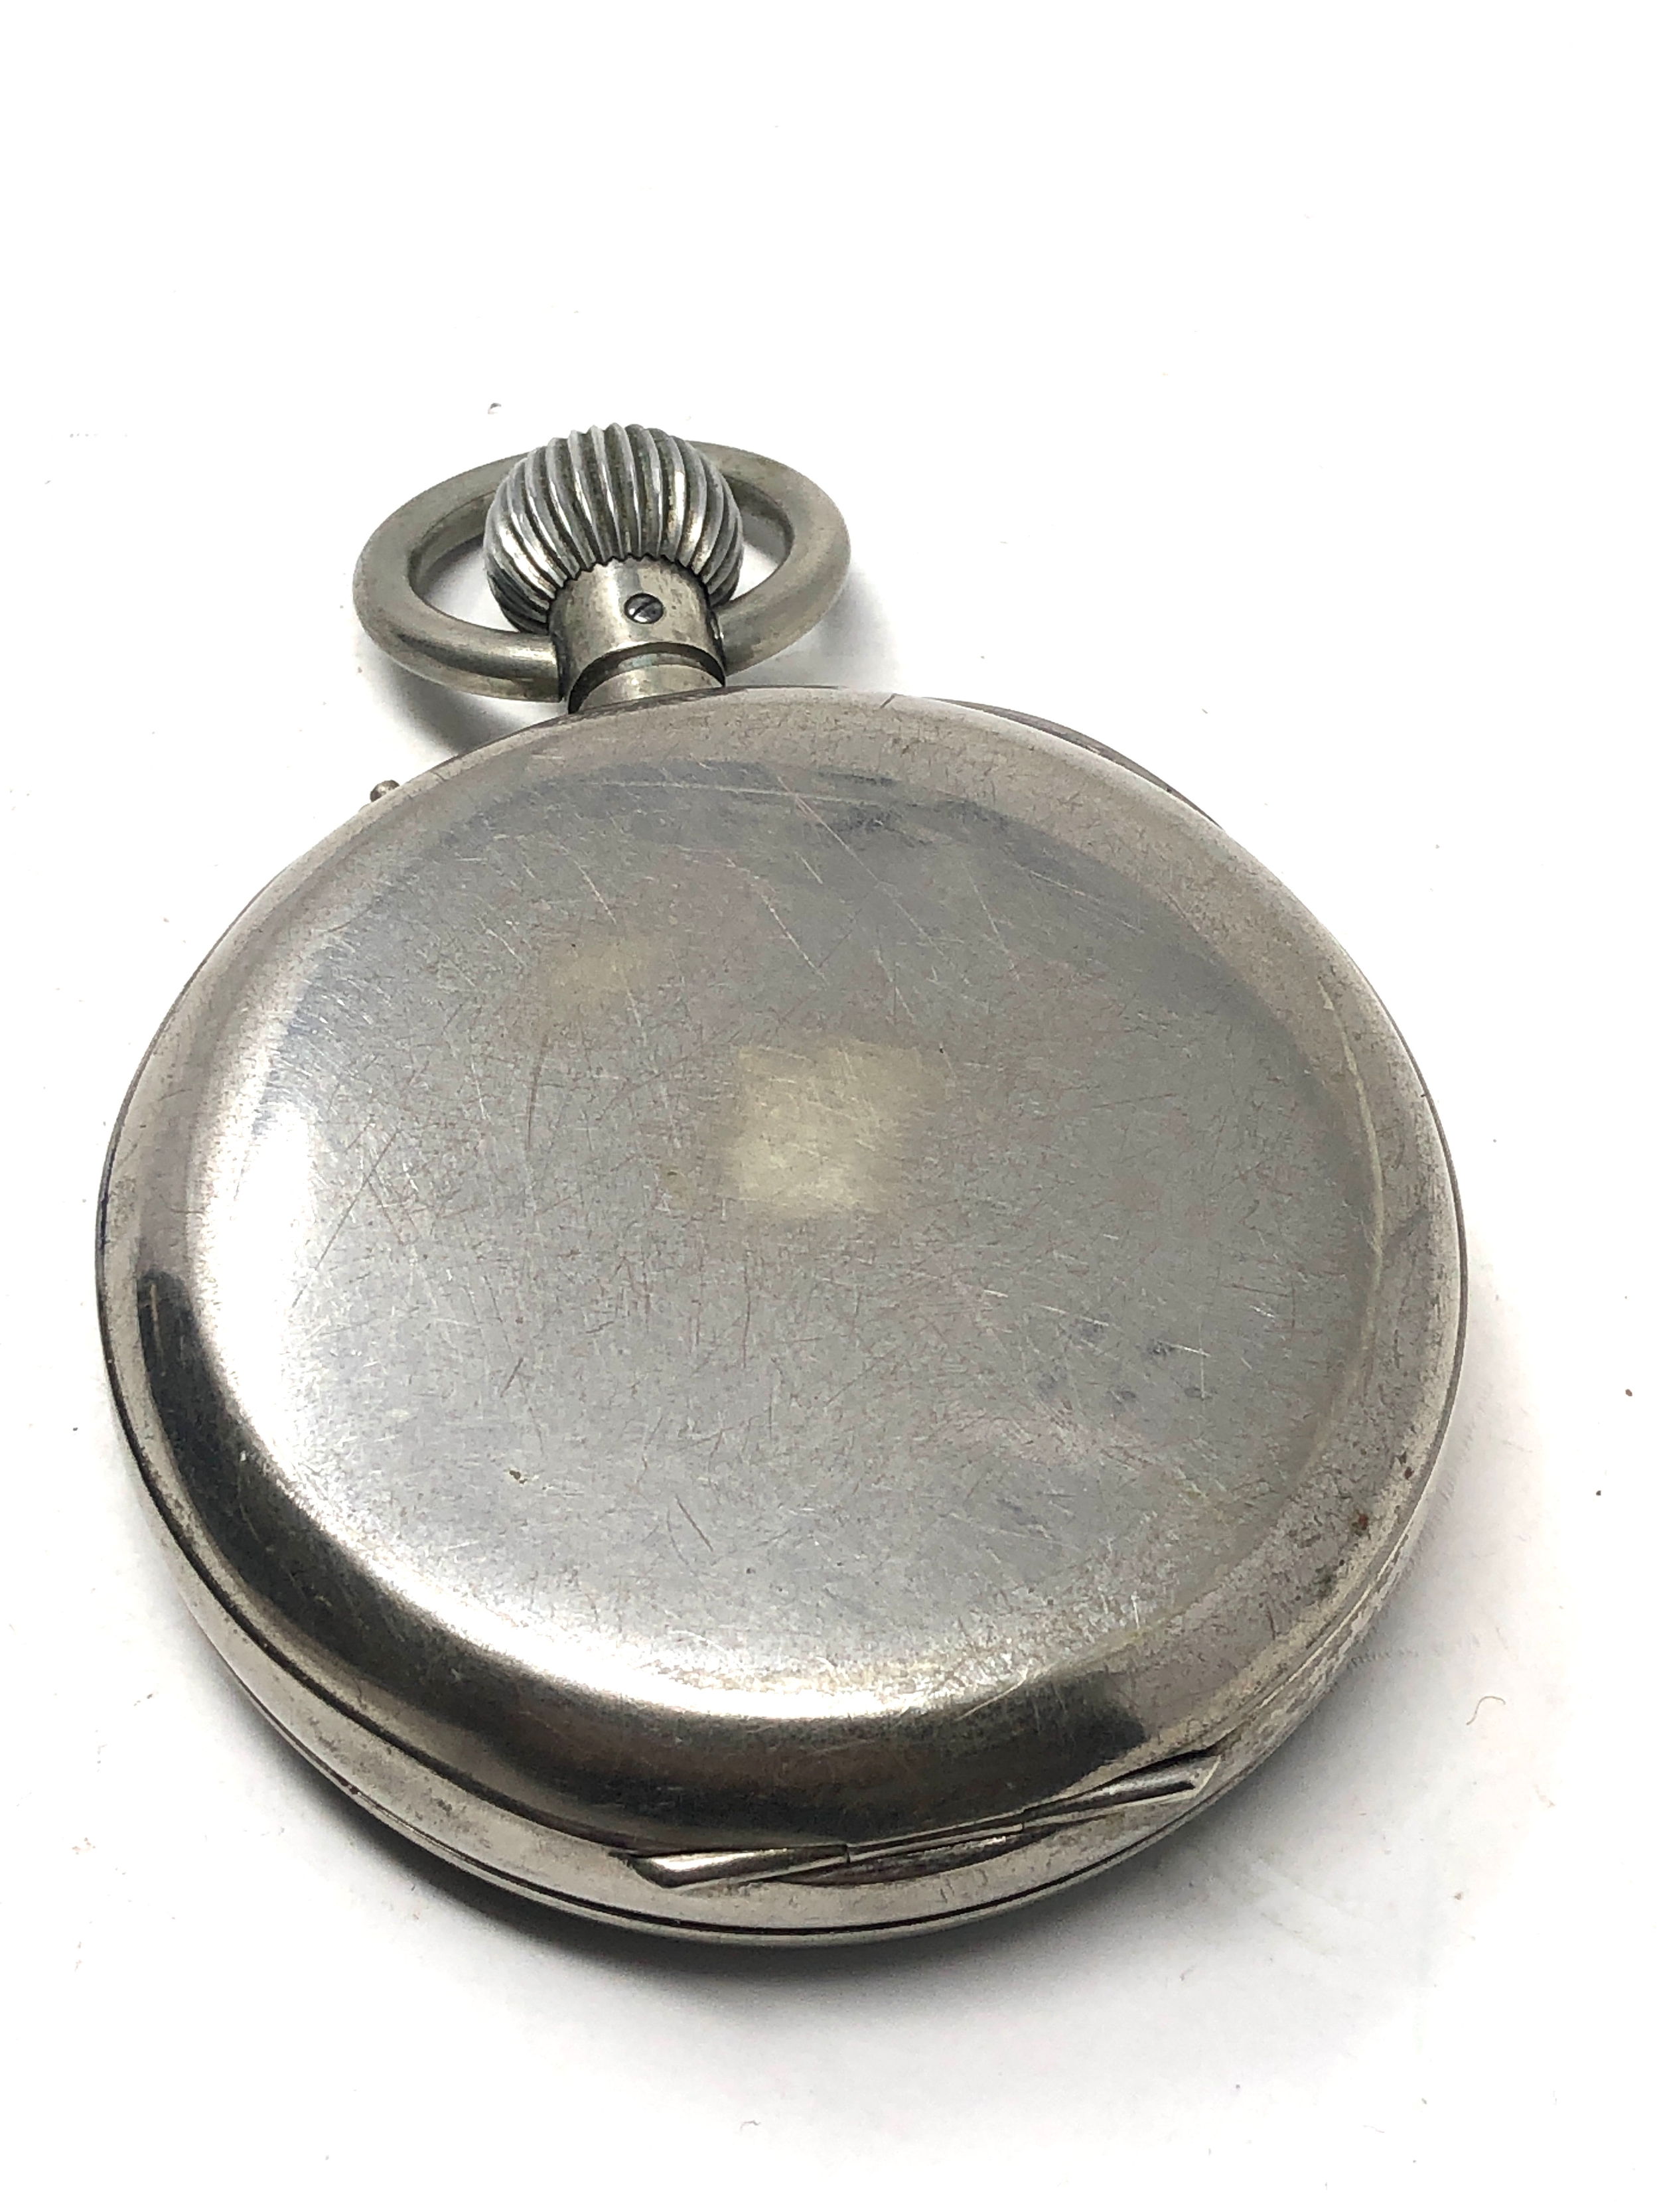 Antique 8 day goliath pocket watch the watch is ticking - Image 2 of 3